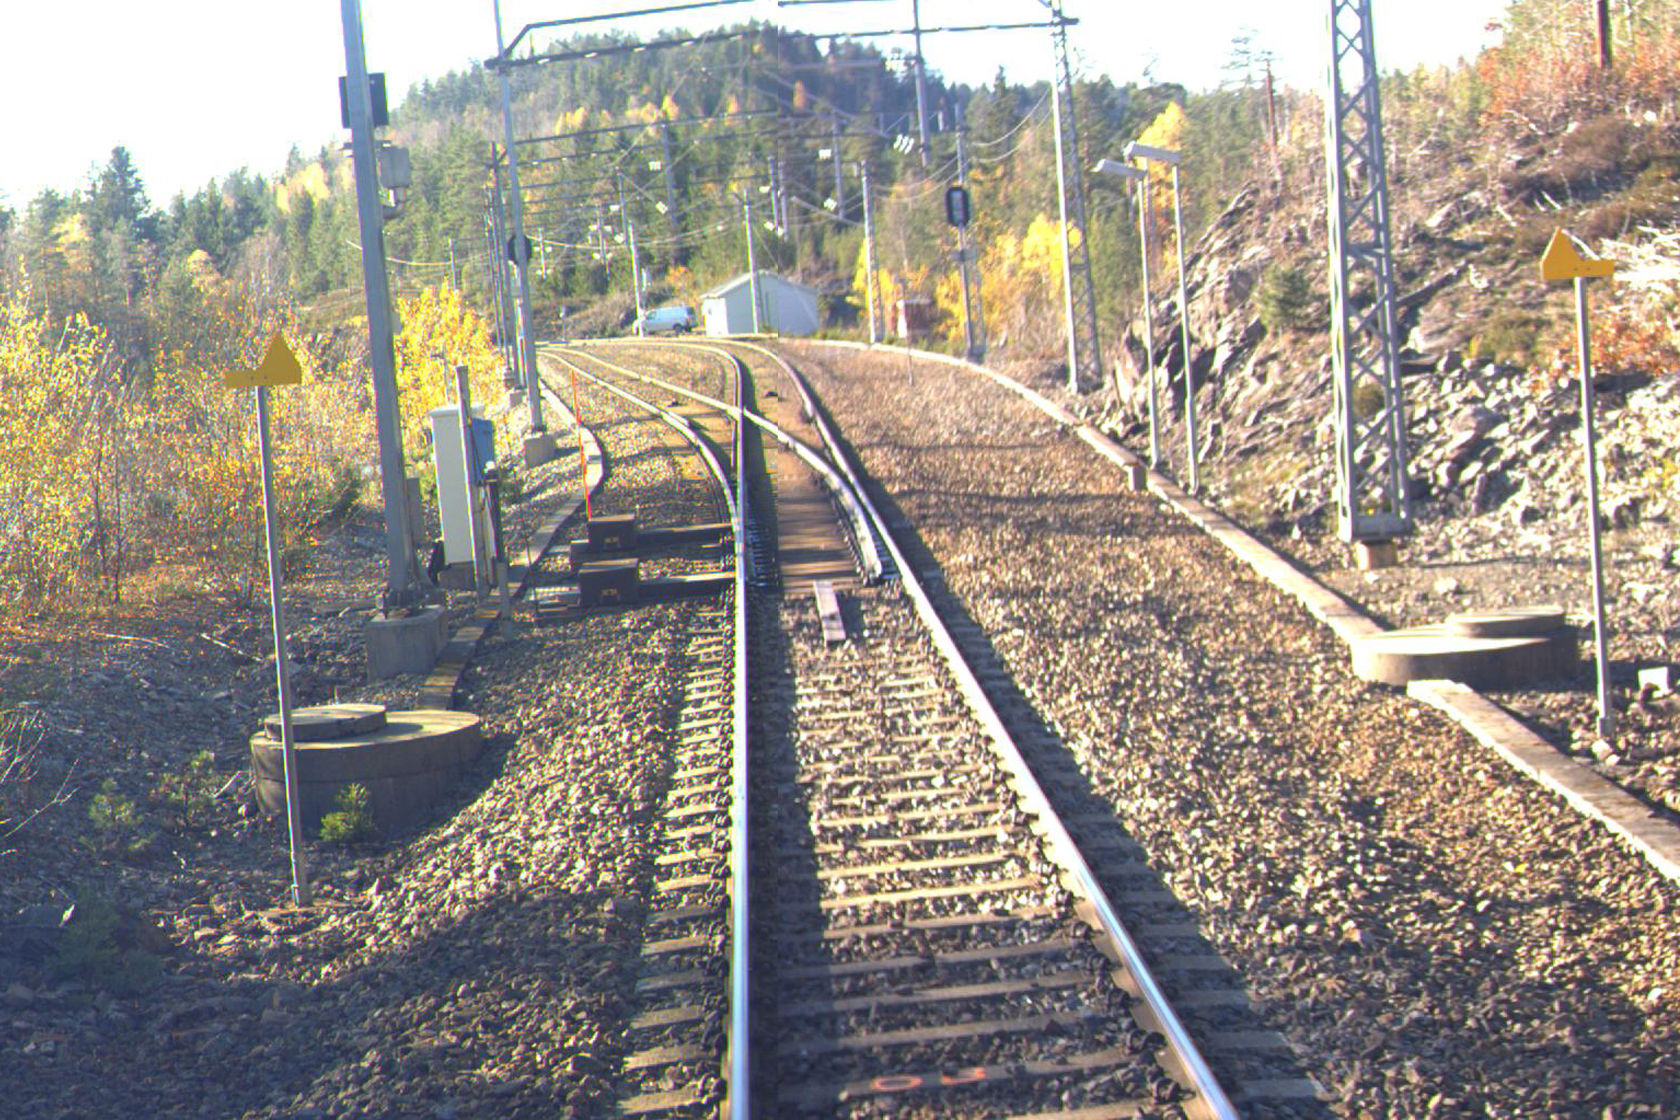 Tracks and building at Lyser station